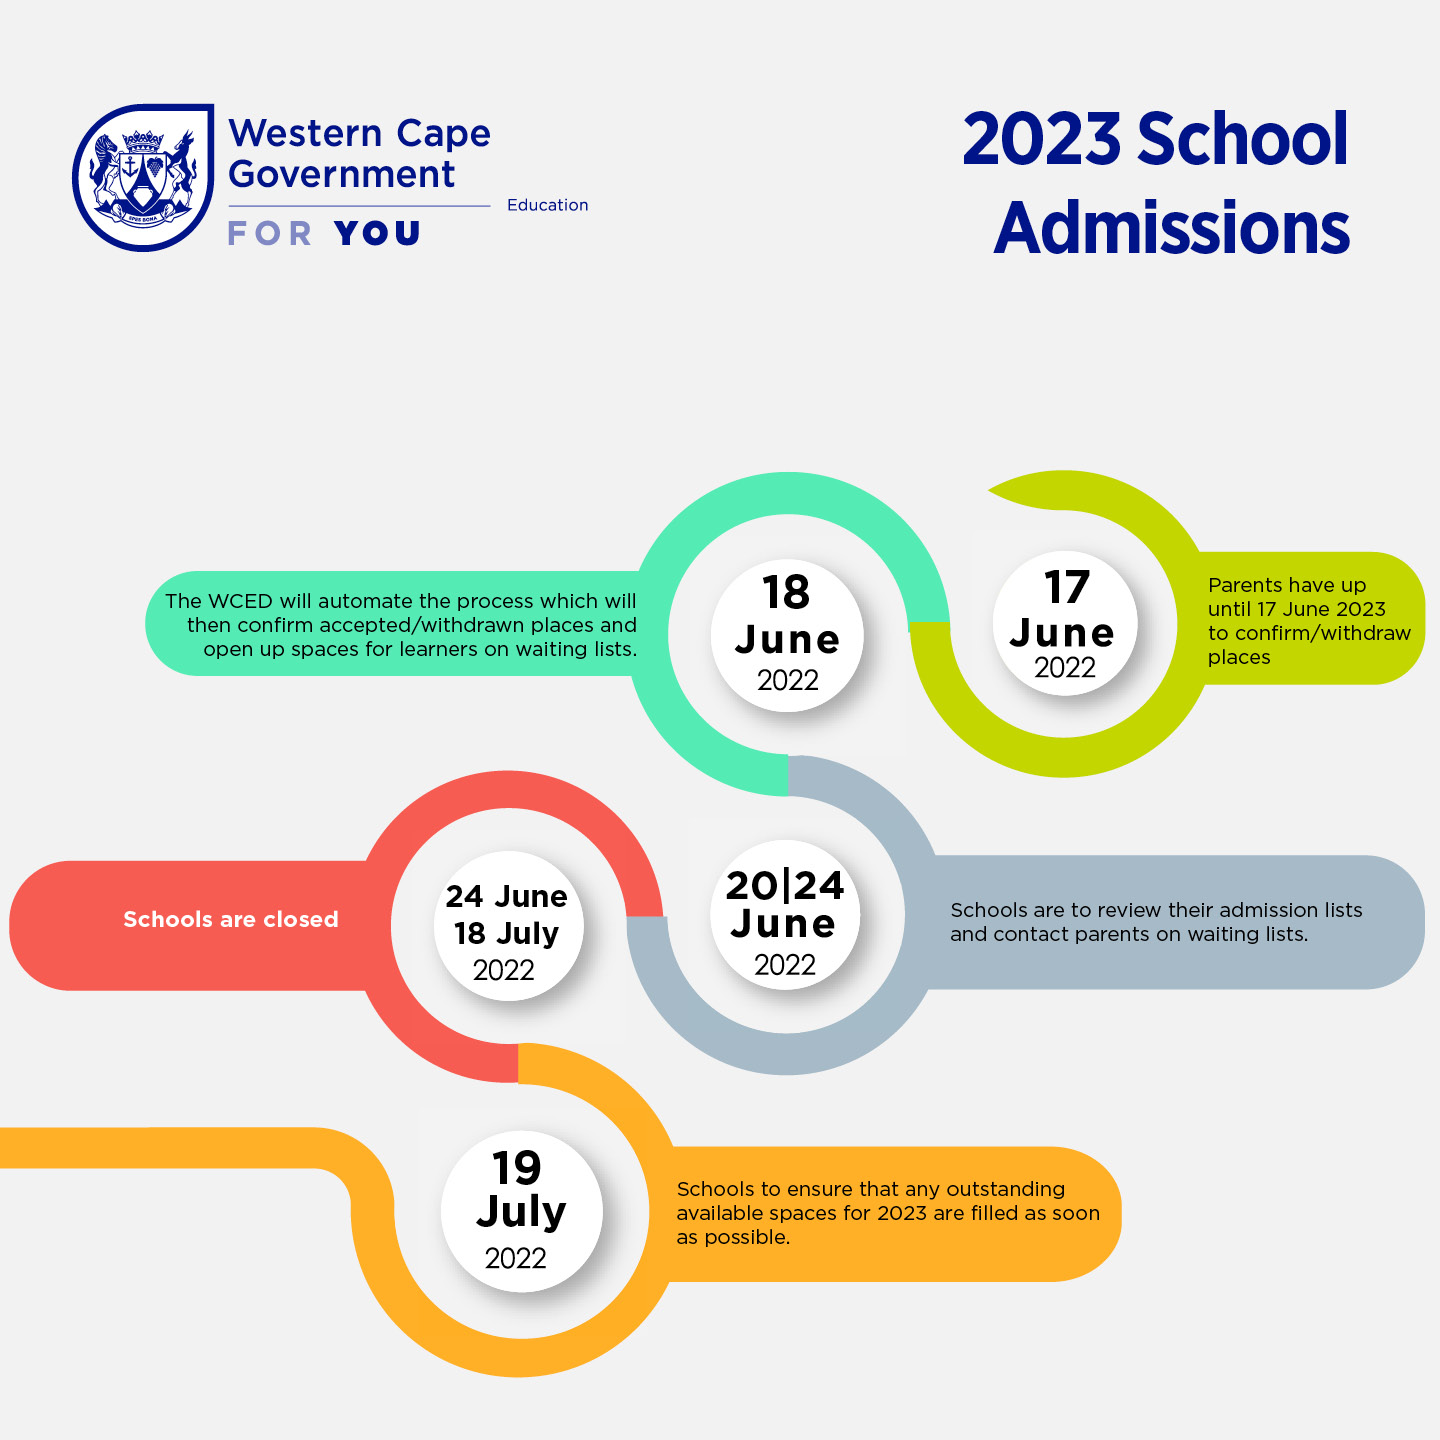 2023 School Admissions IG Western Cape Government